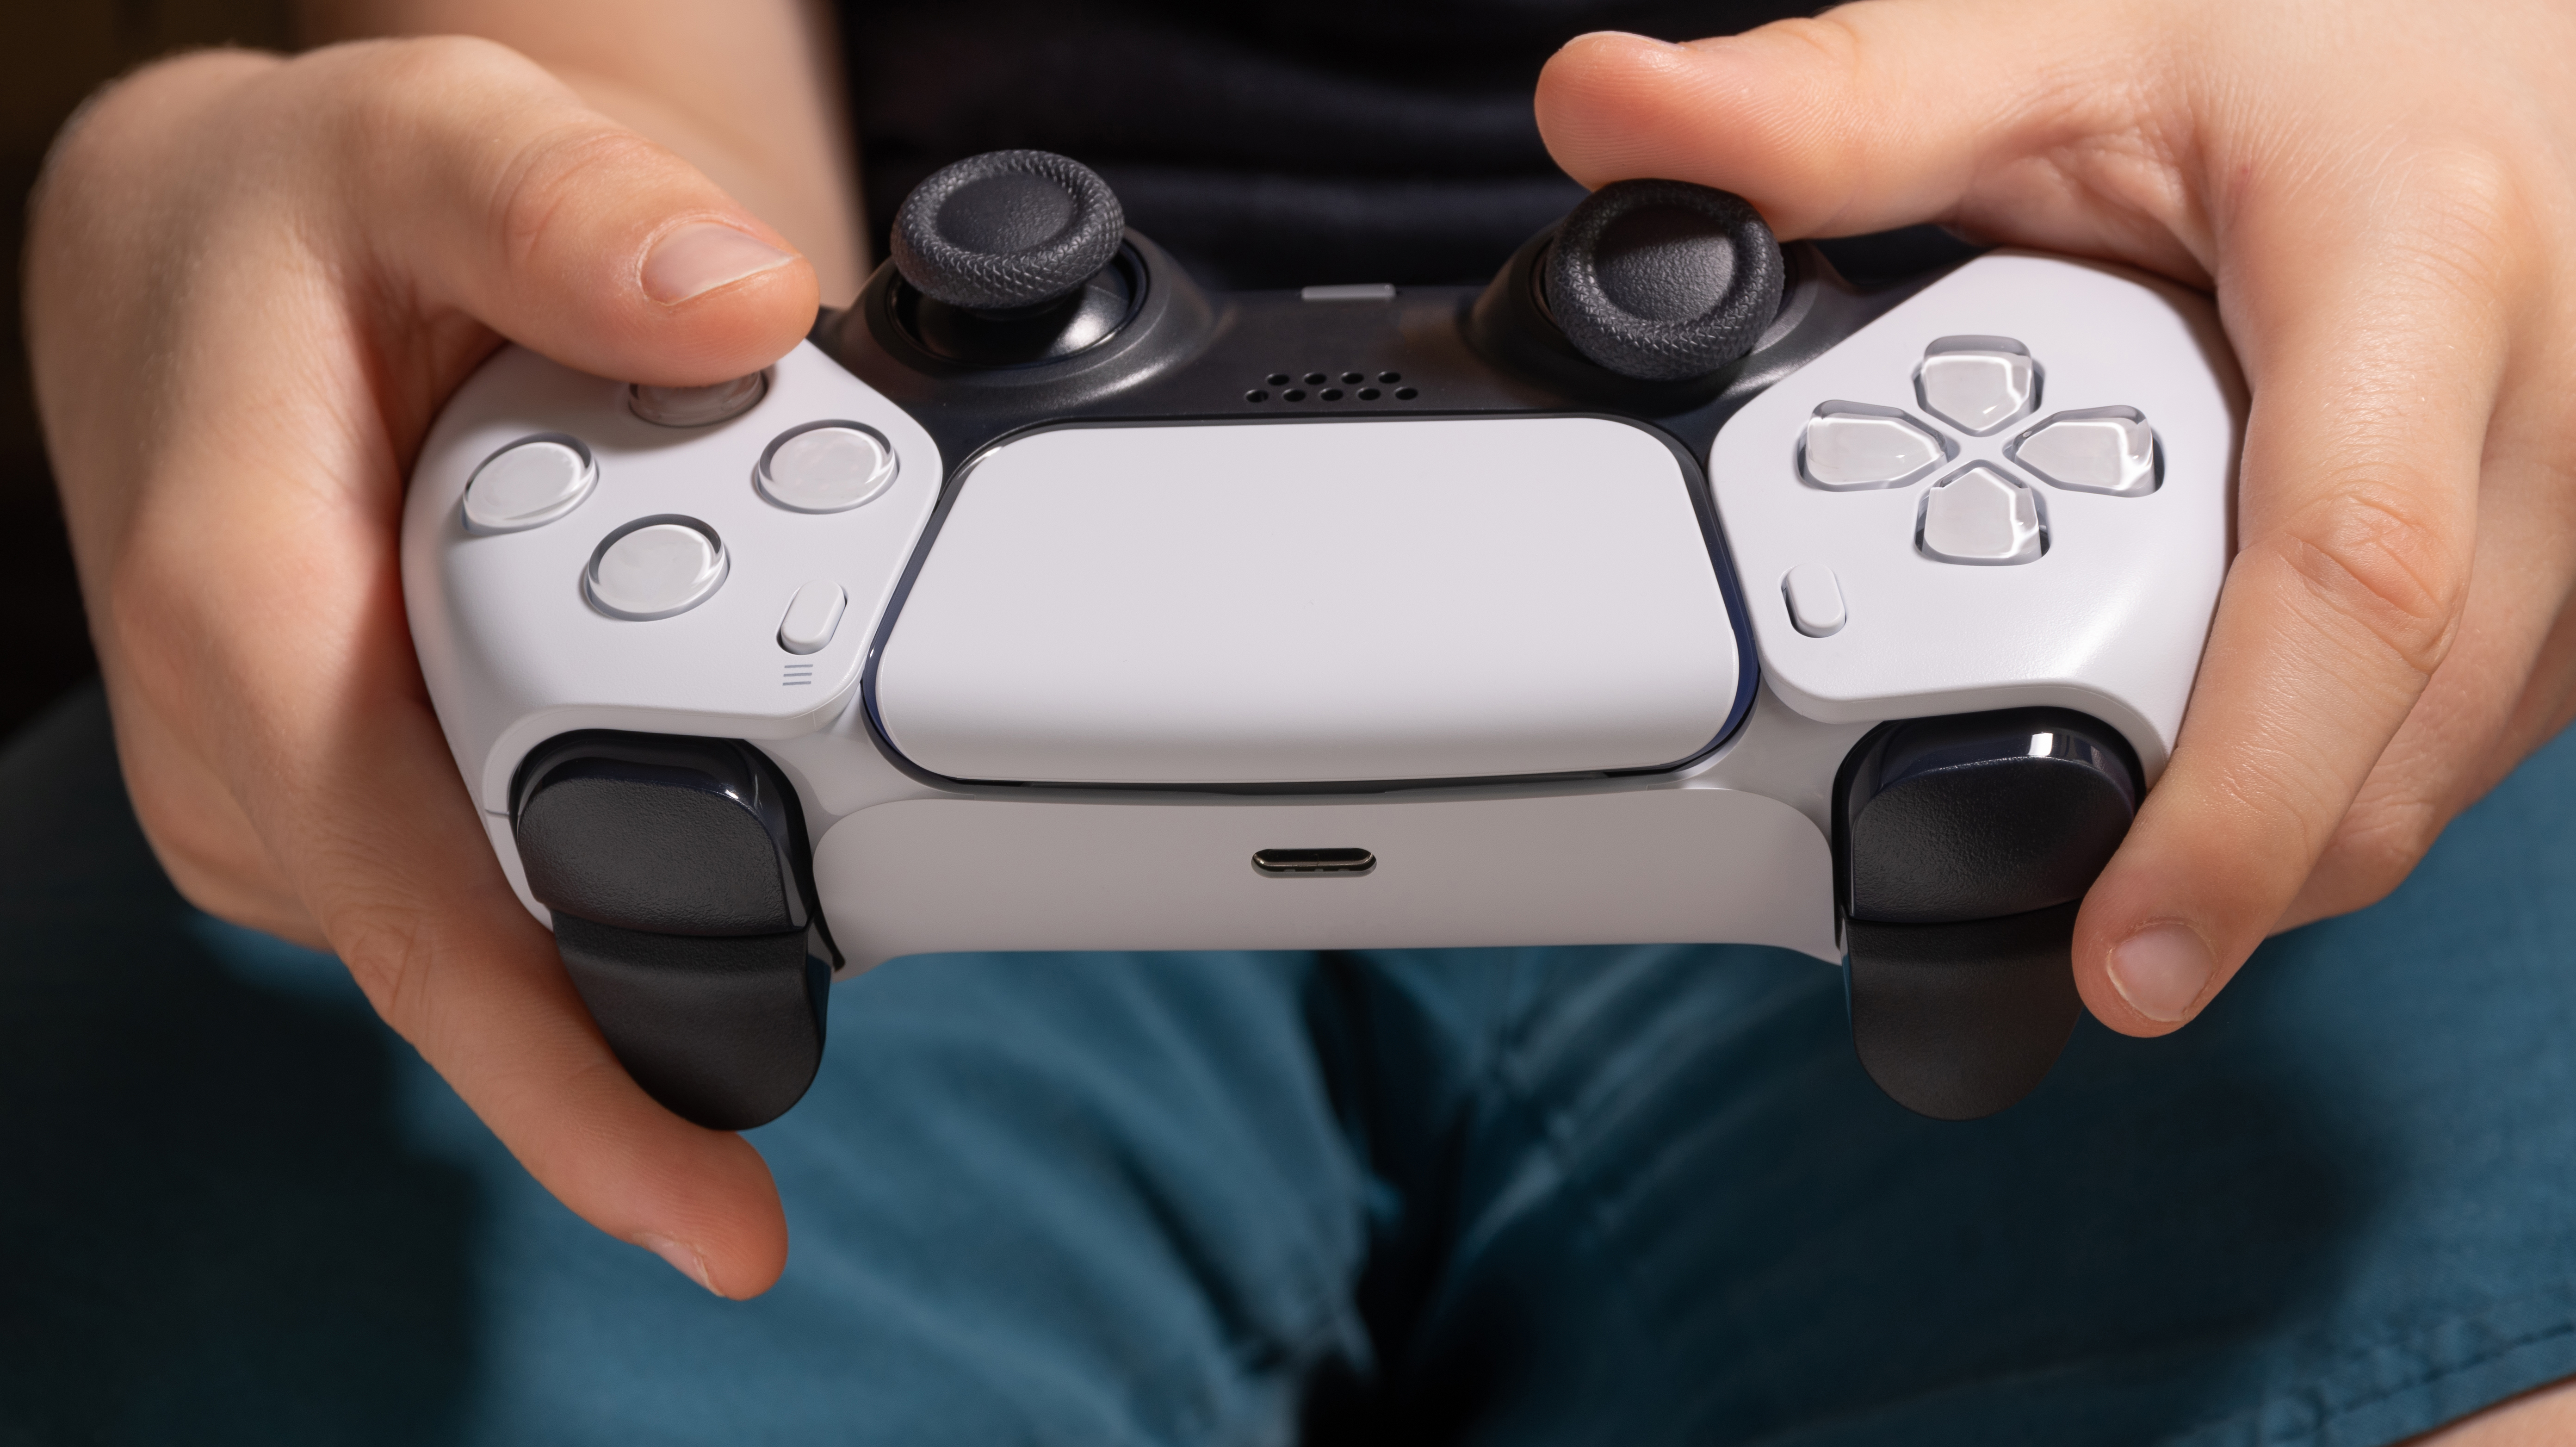 Steam game listings will show support for PlayStation controllers